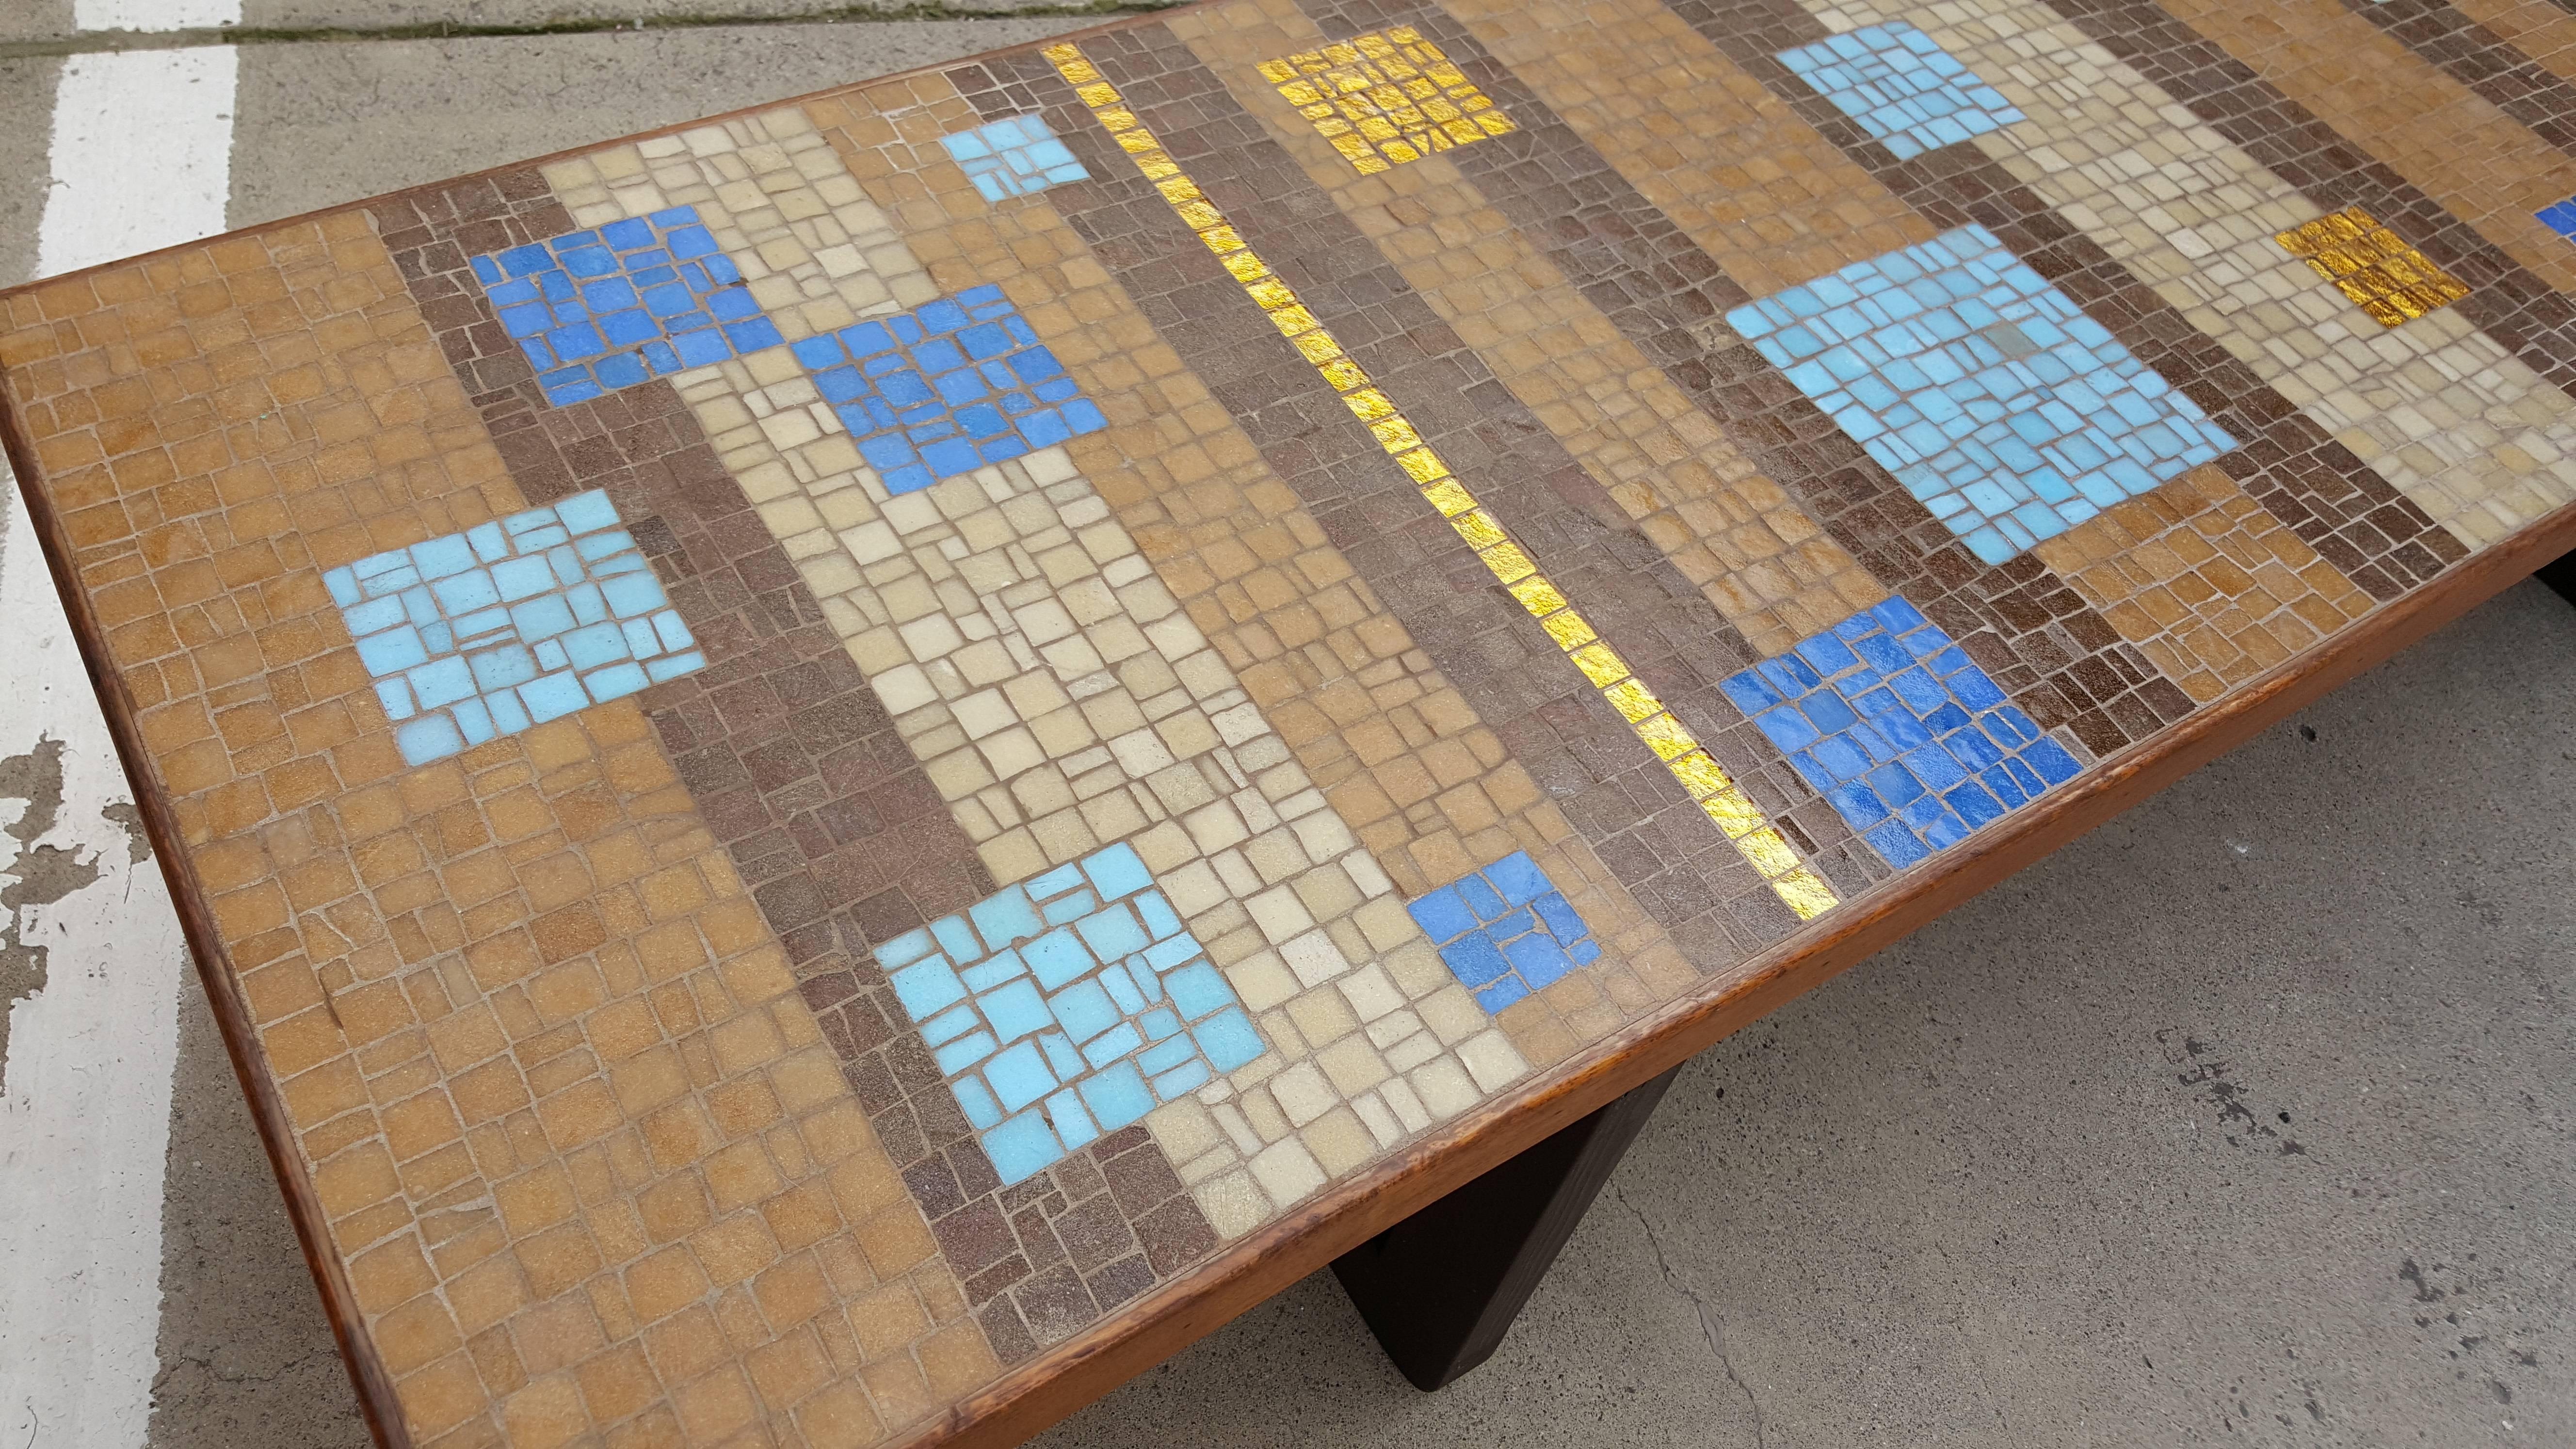 Large-scale mosaic tile coffee table with geometric multi-color pattern. Gold foil tiles appear illuminated. Excellent choice of contrasting blues and turquoise against the organic background tiles. Solid, sturdy construction. Large surface as table